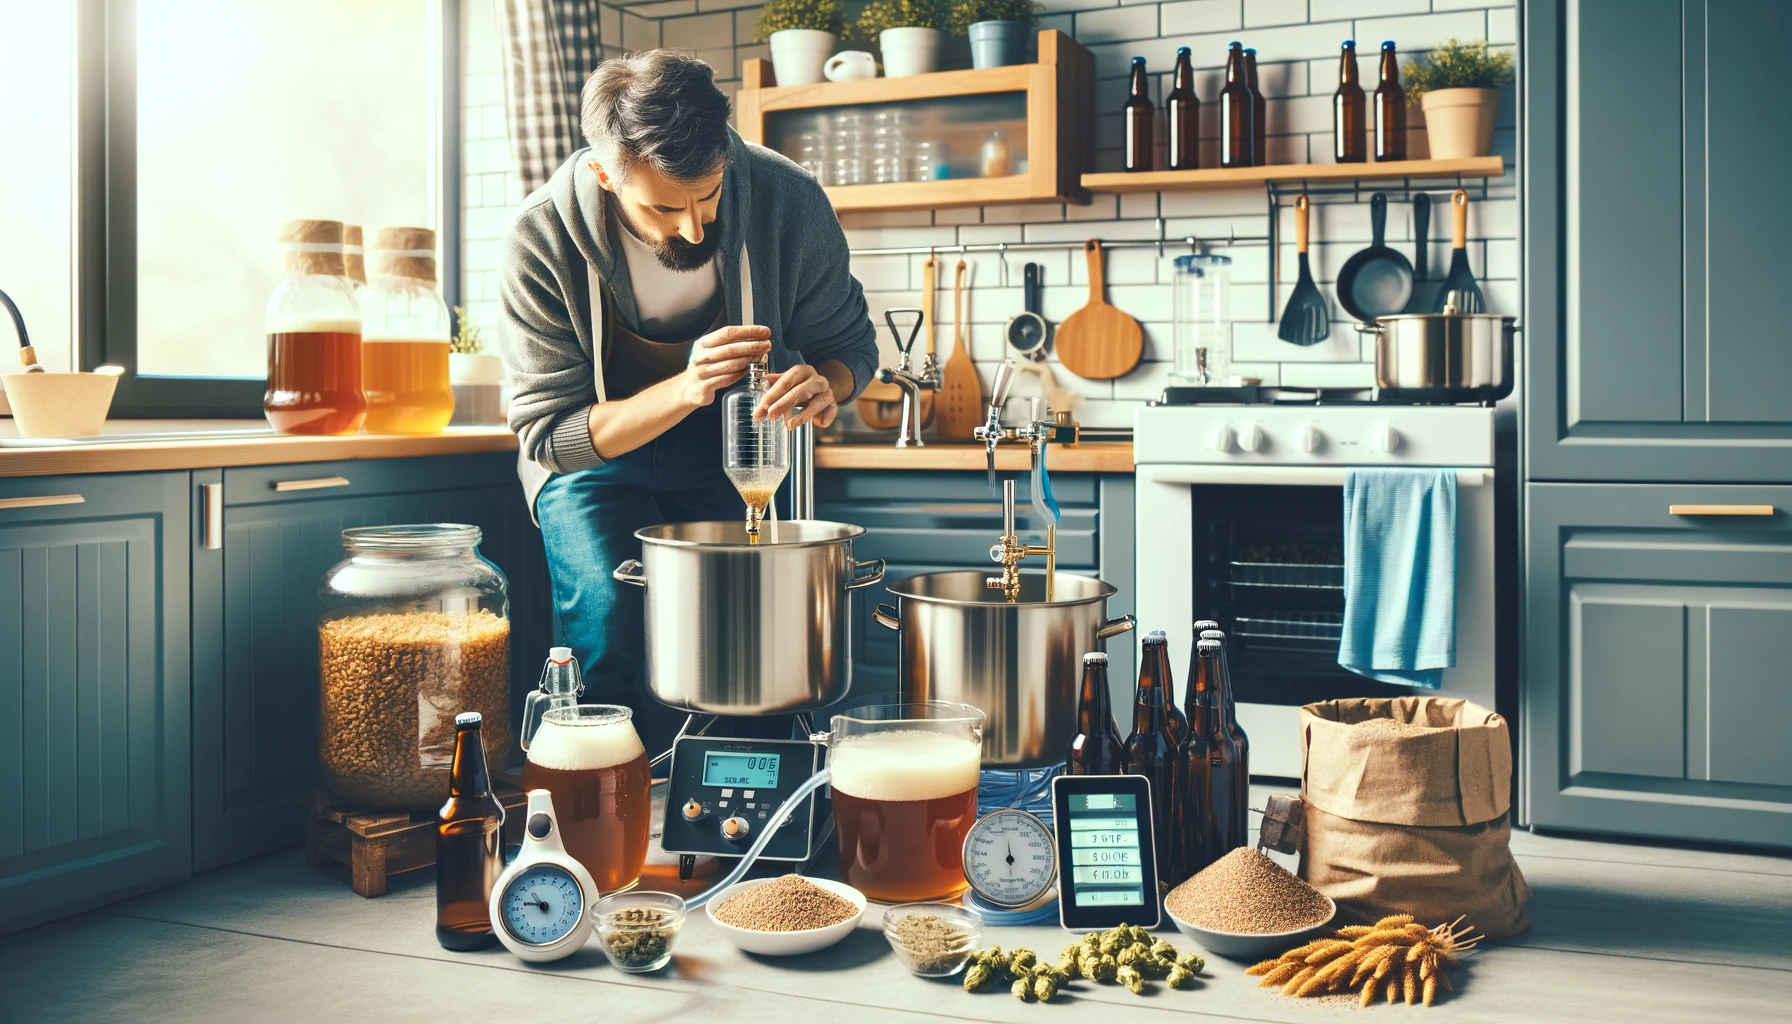 An individual in their kitchen, working on homebrewing beer